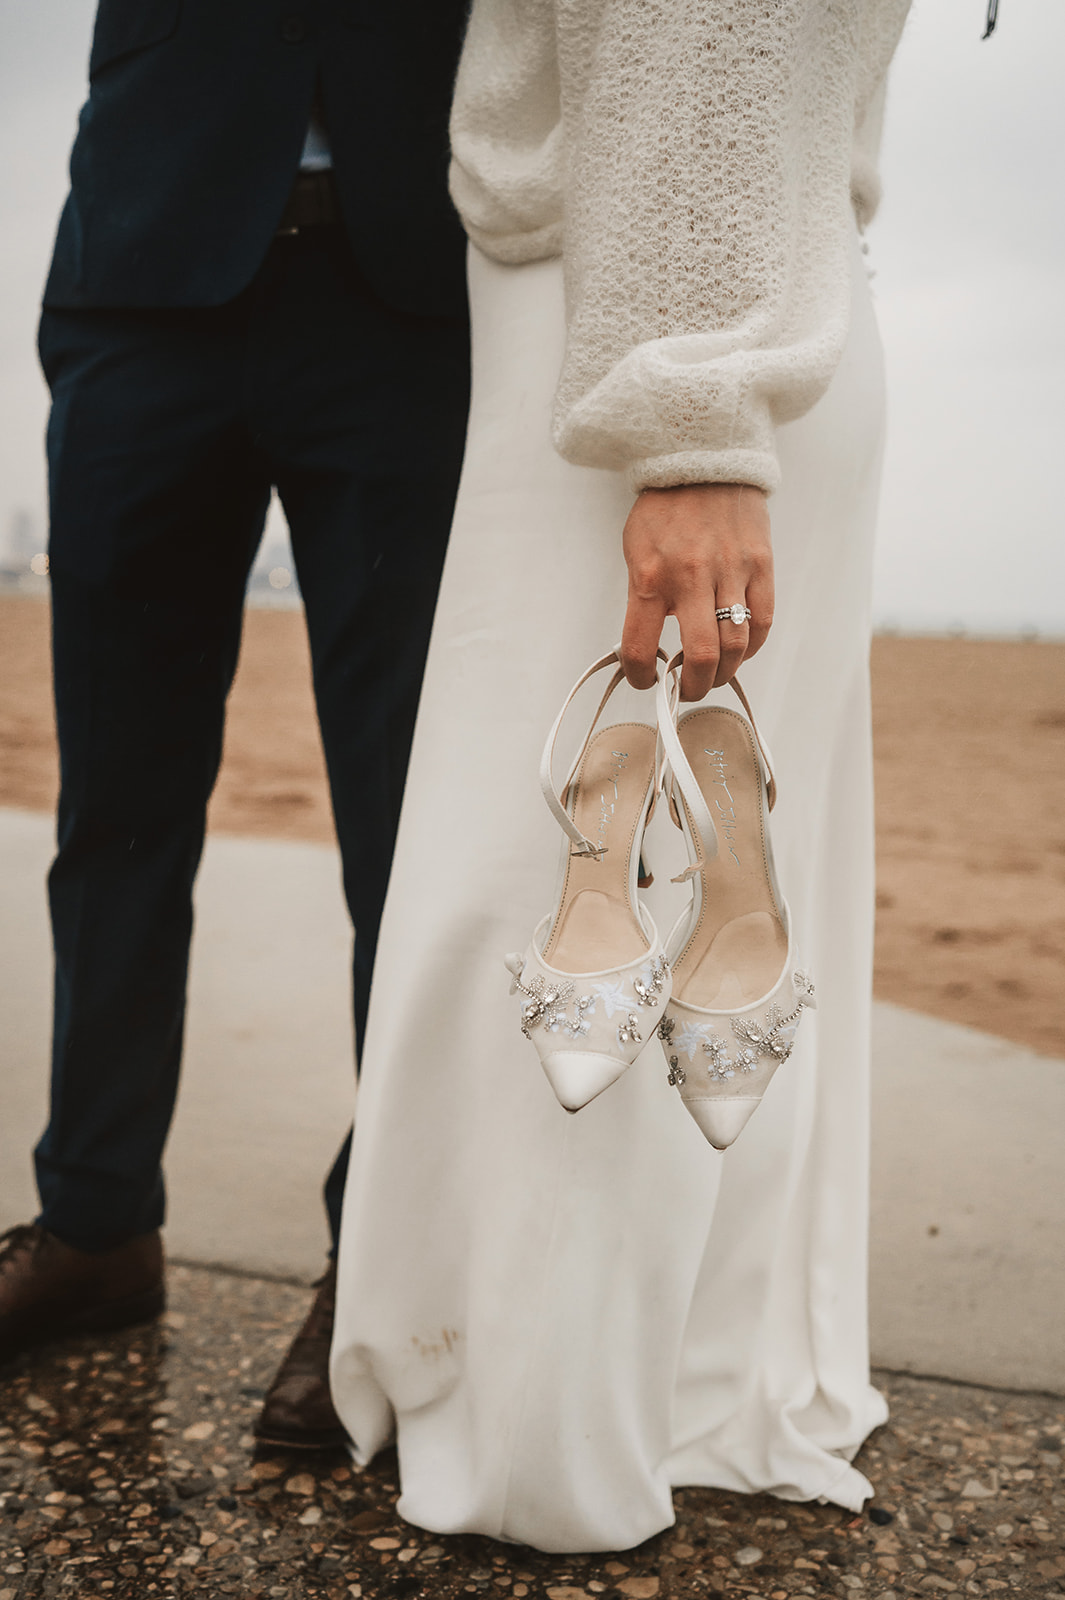 Intimate rainy day Chicago elopement wedding photography - barefoot bride in rain holding shoes